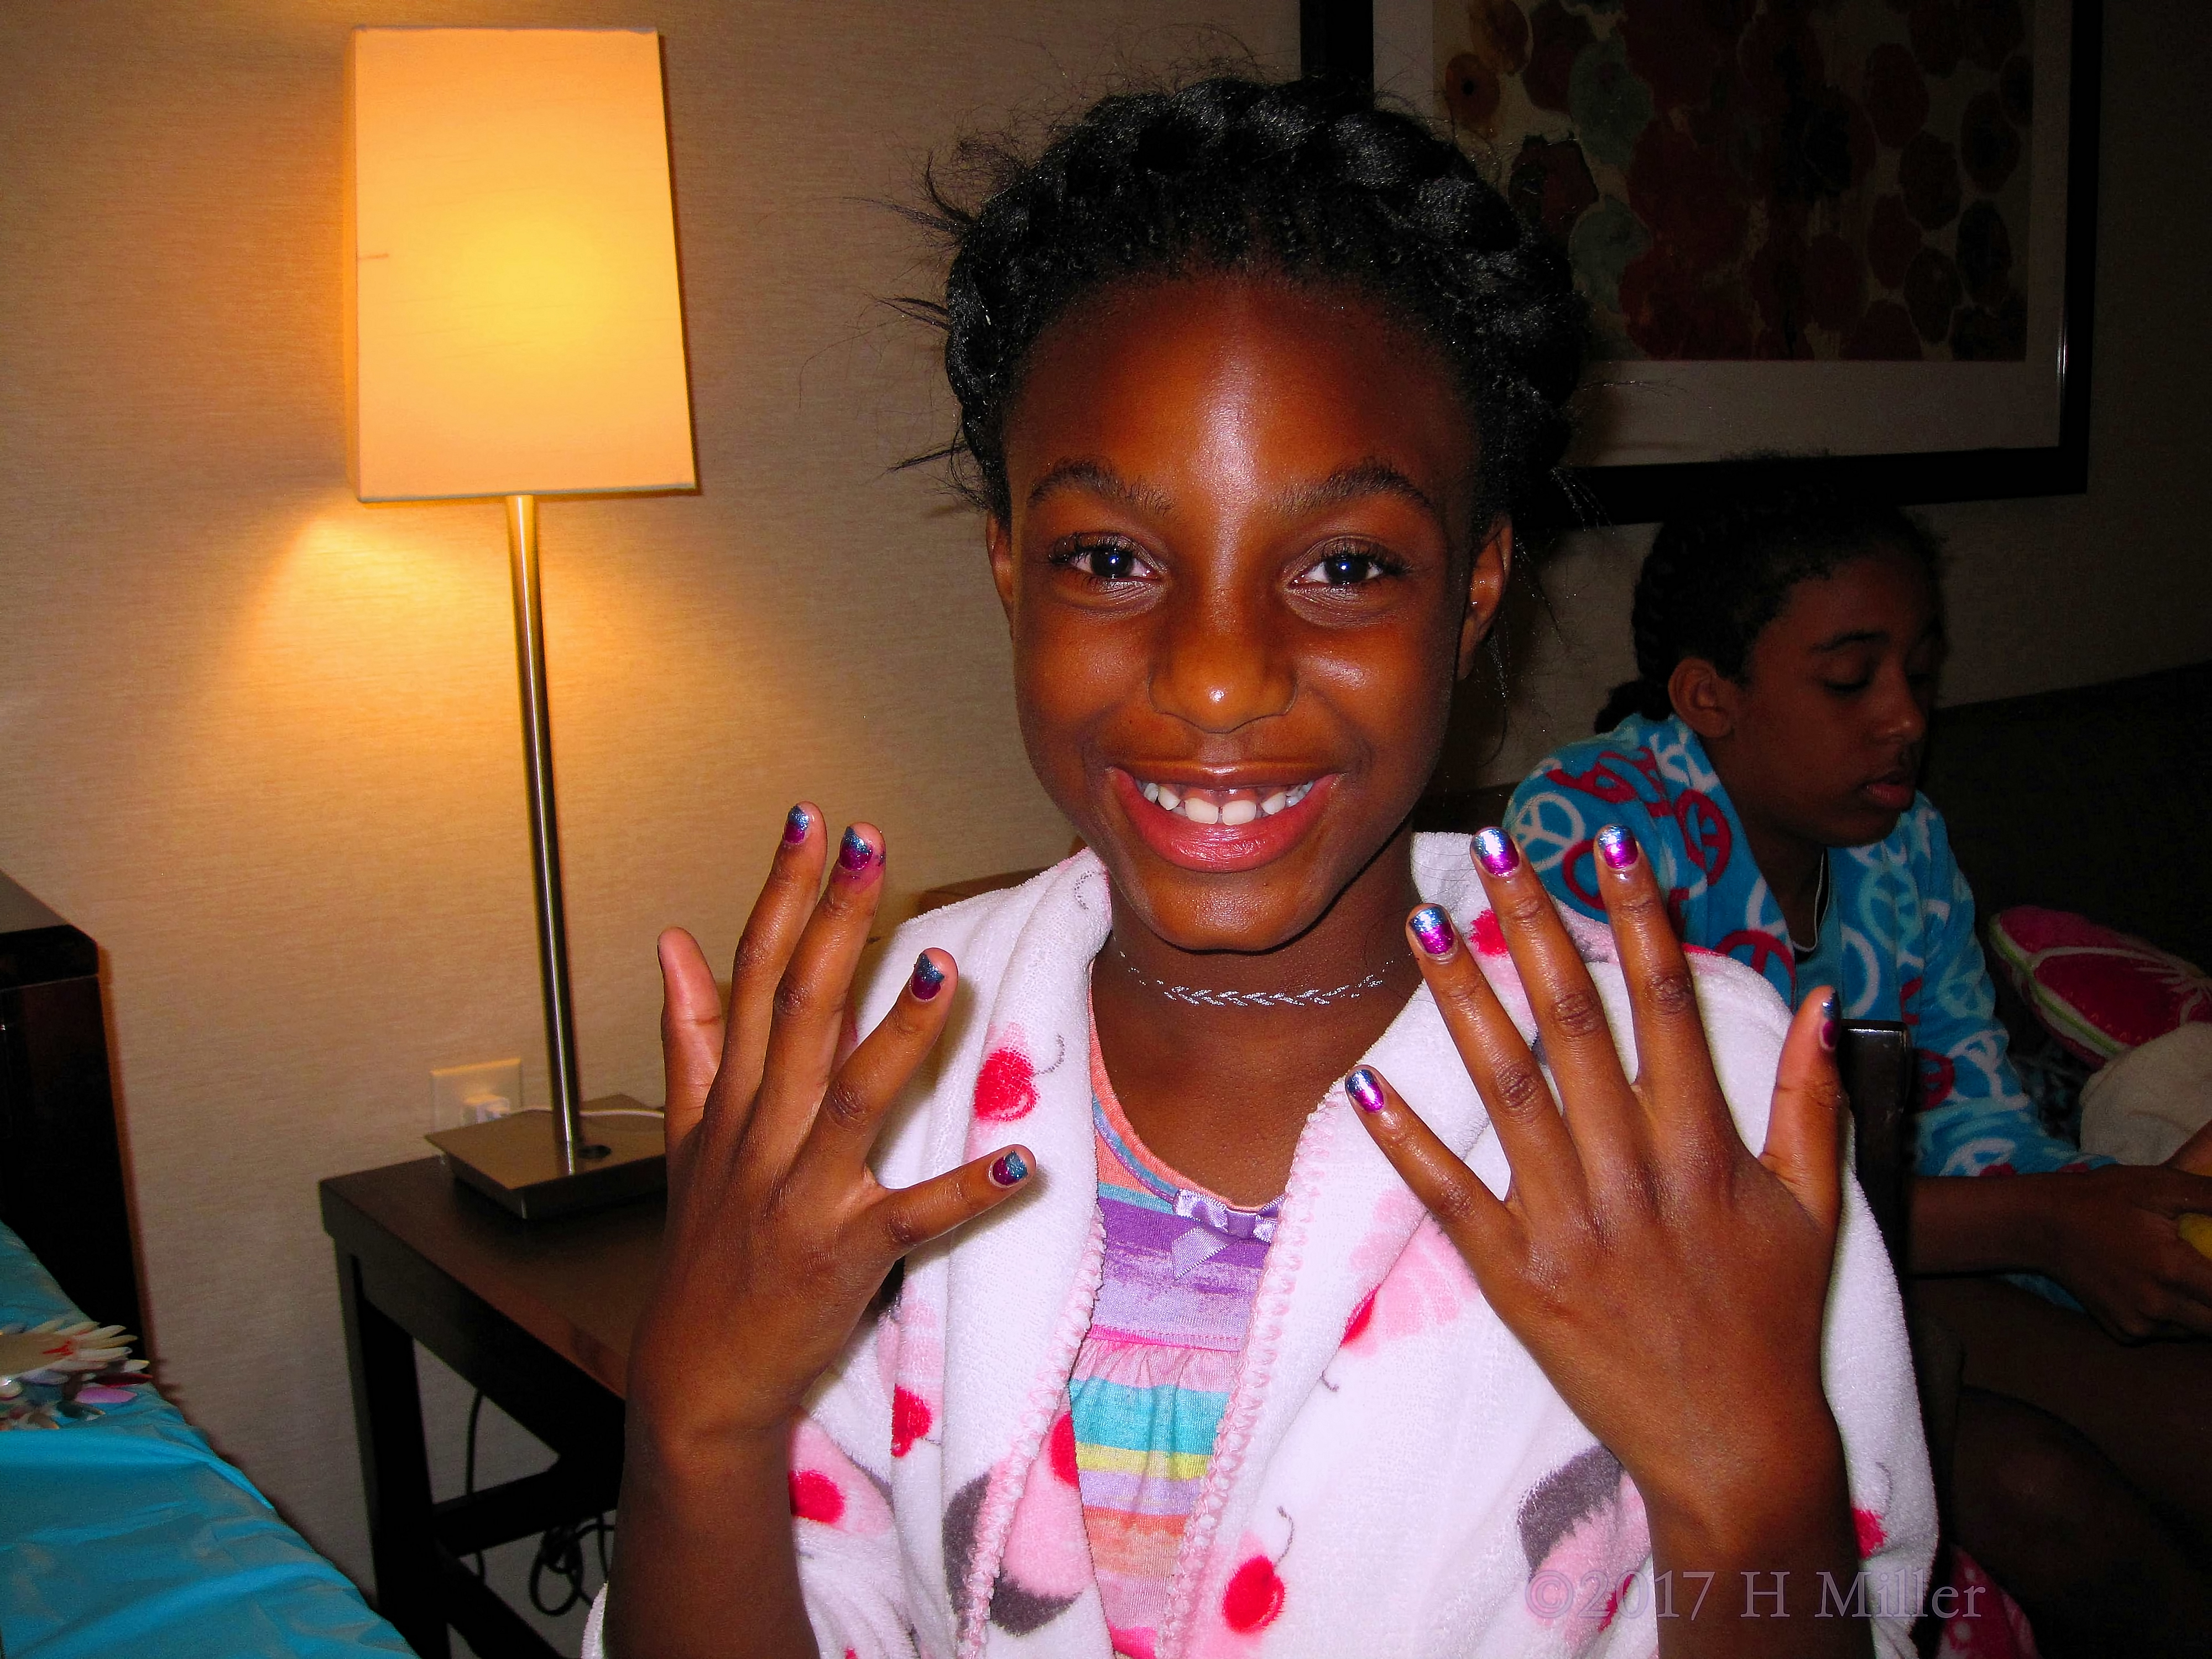 Smiling With Her New Girls Mini Manicure! 4